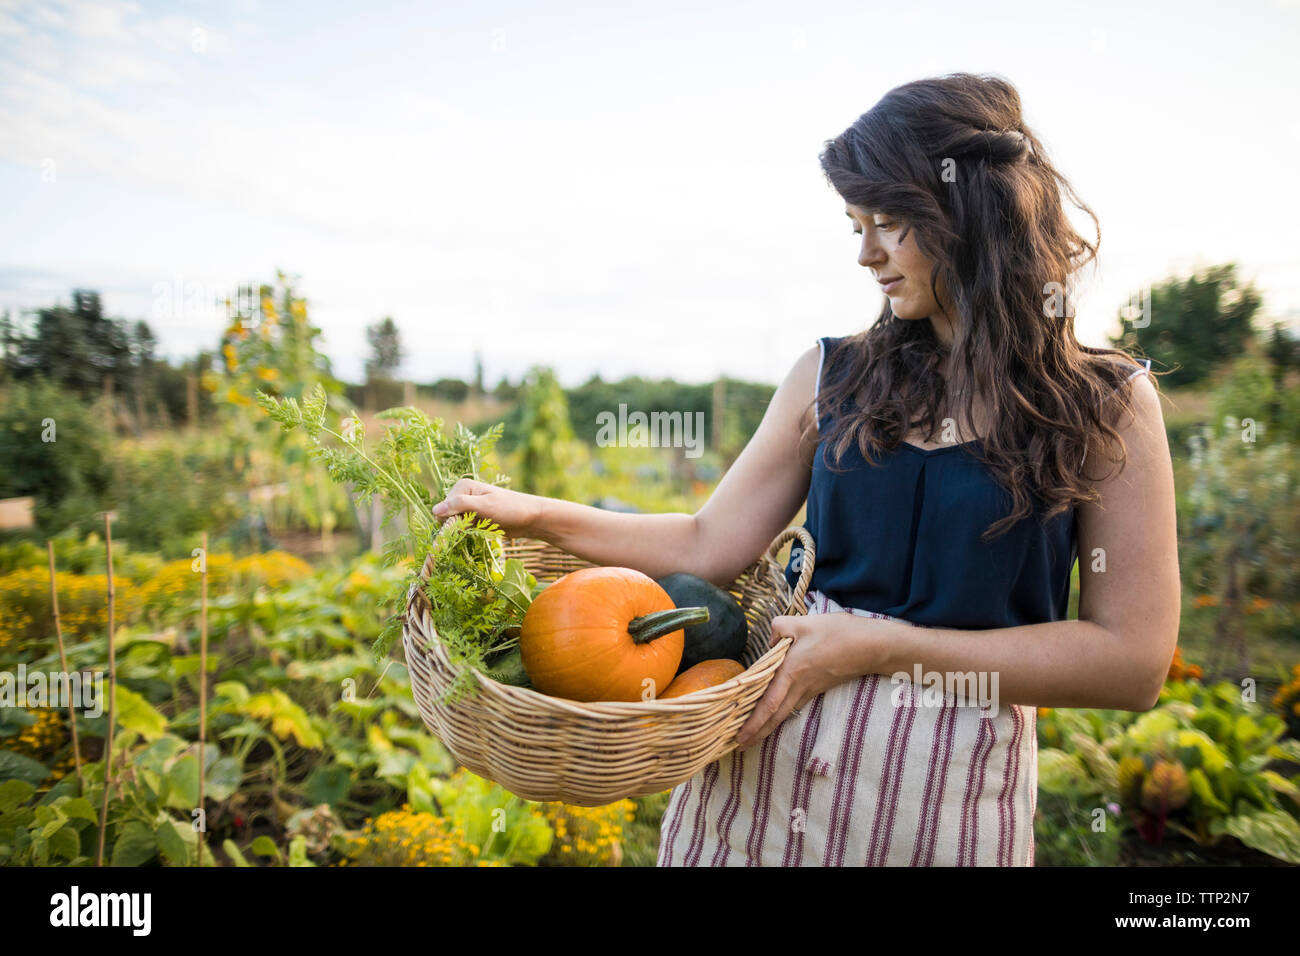 Woman looking at vegetables while carrying it in basket at community garden Stock Photo